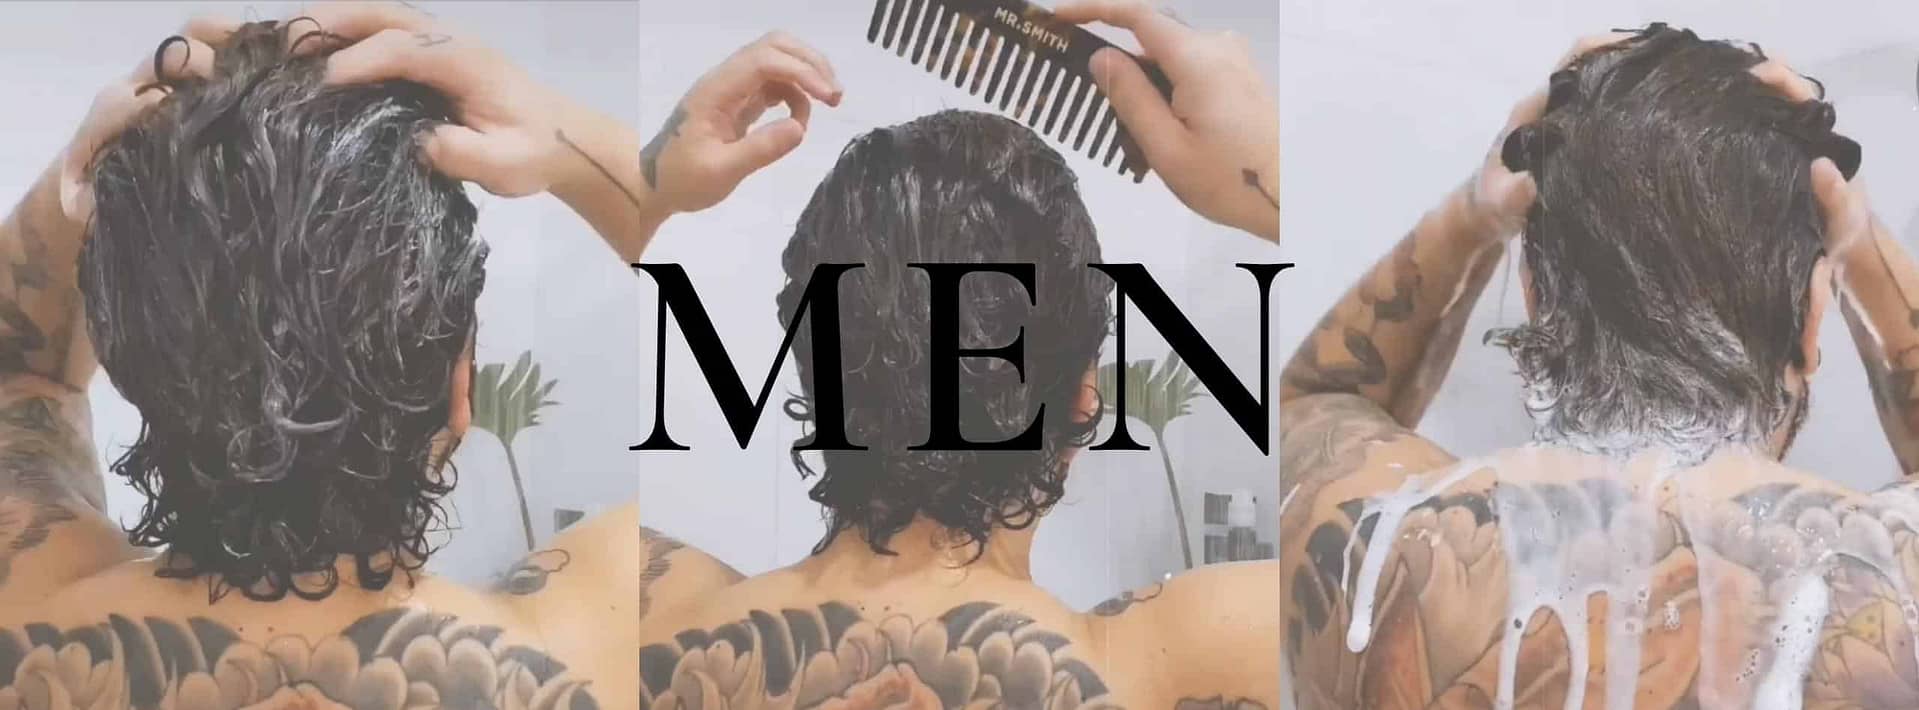 hairshop products for men